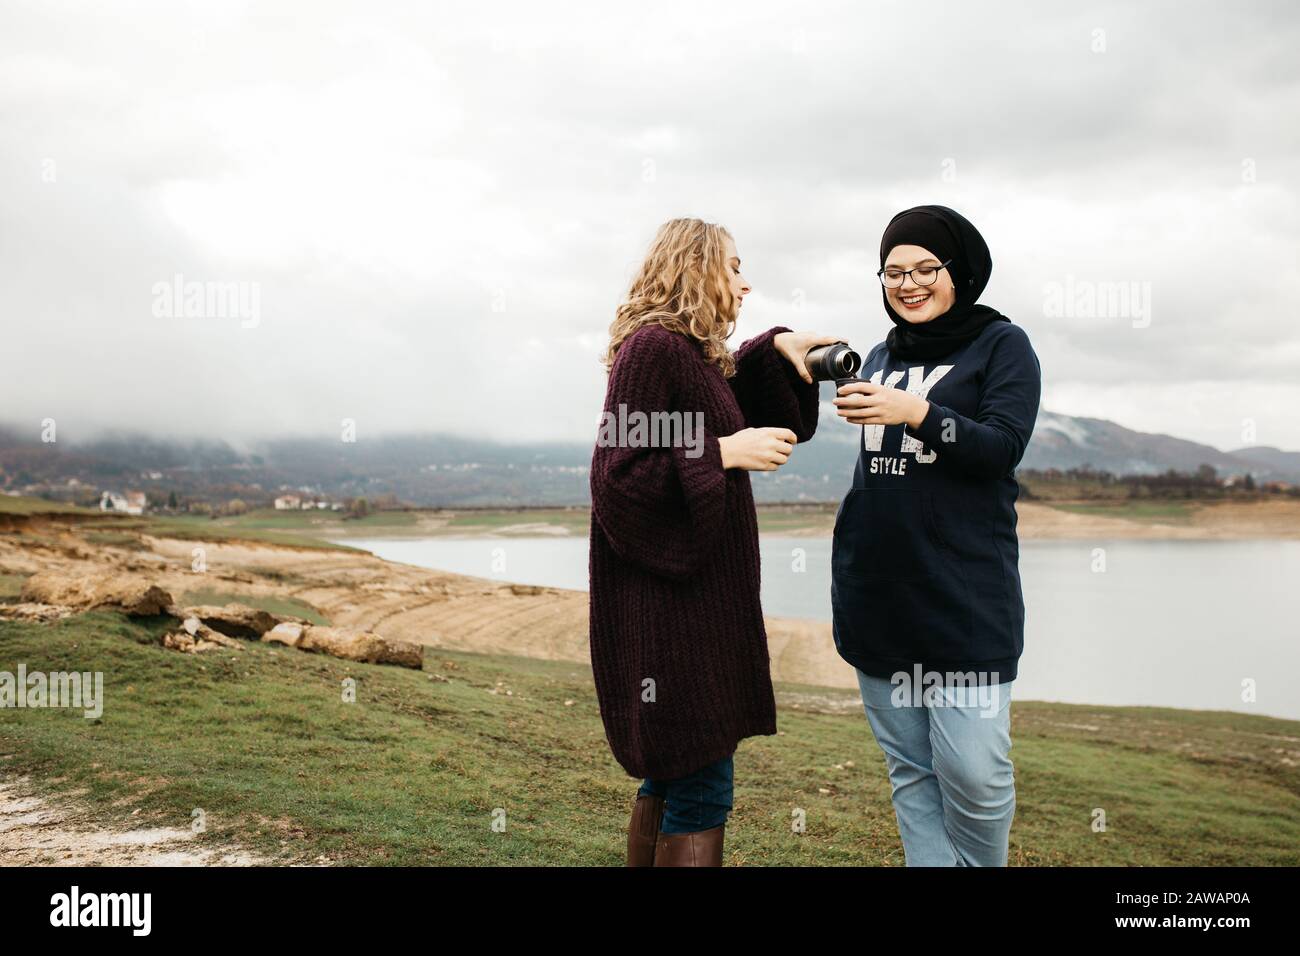 Lifestyle portrait of two best friends, smiling and drinking coffee together. Outdoor photo of two young women, one with hijab, enjoying each other co Stock Photo